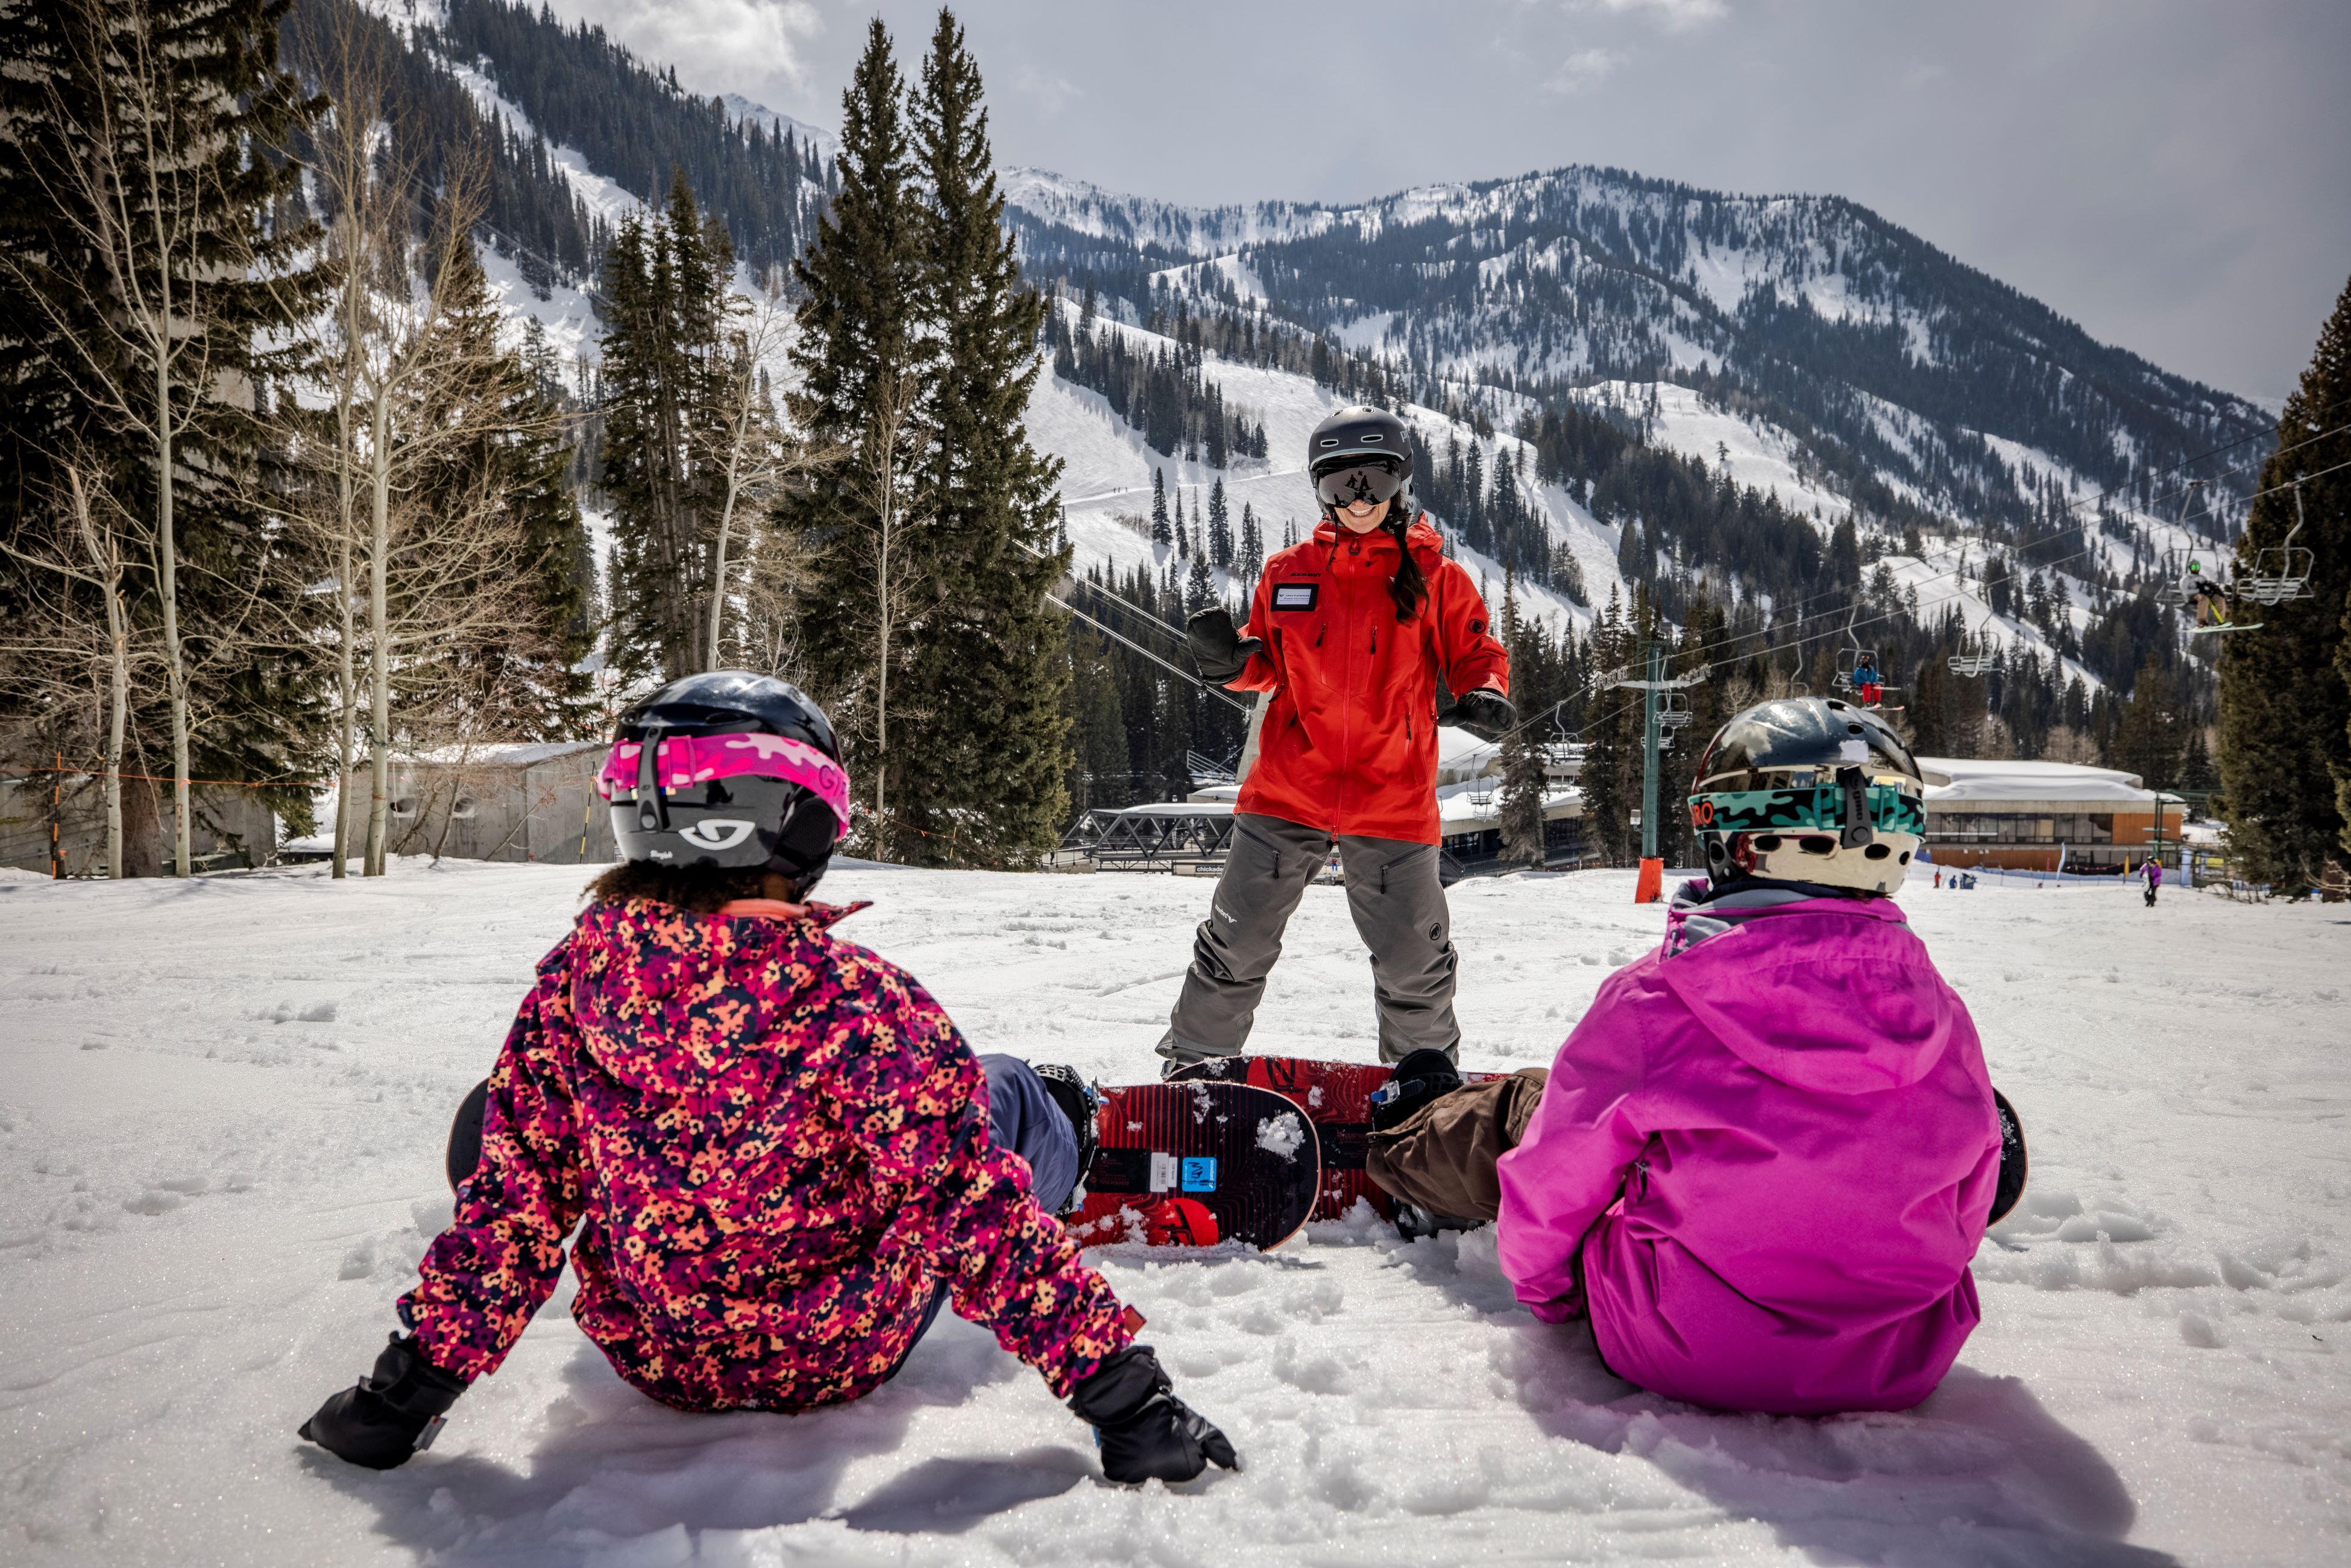 ski and snowboard lessons for teens and youth, Snowbird Utah